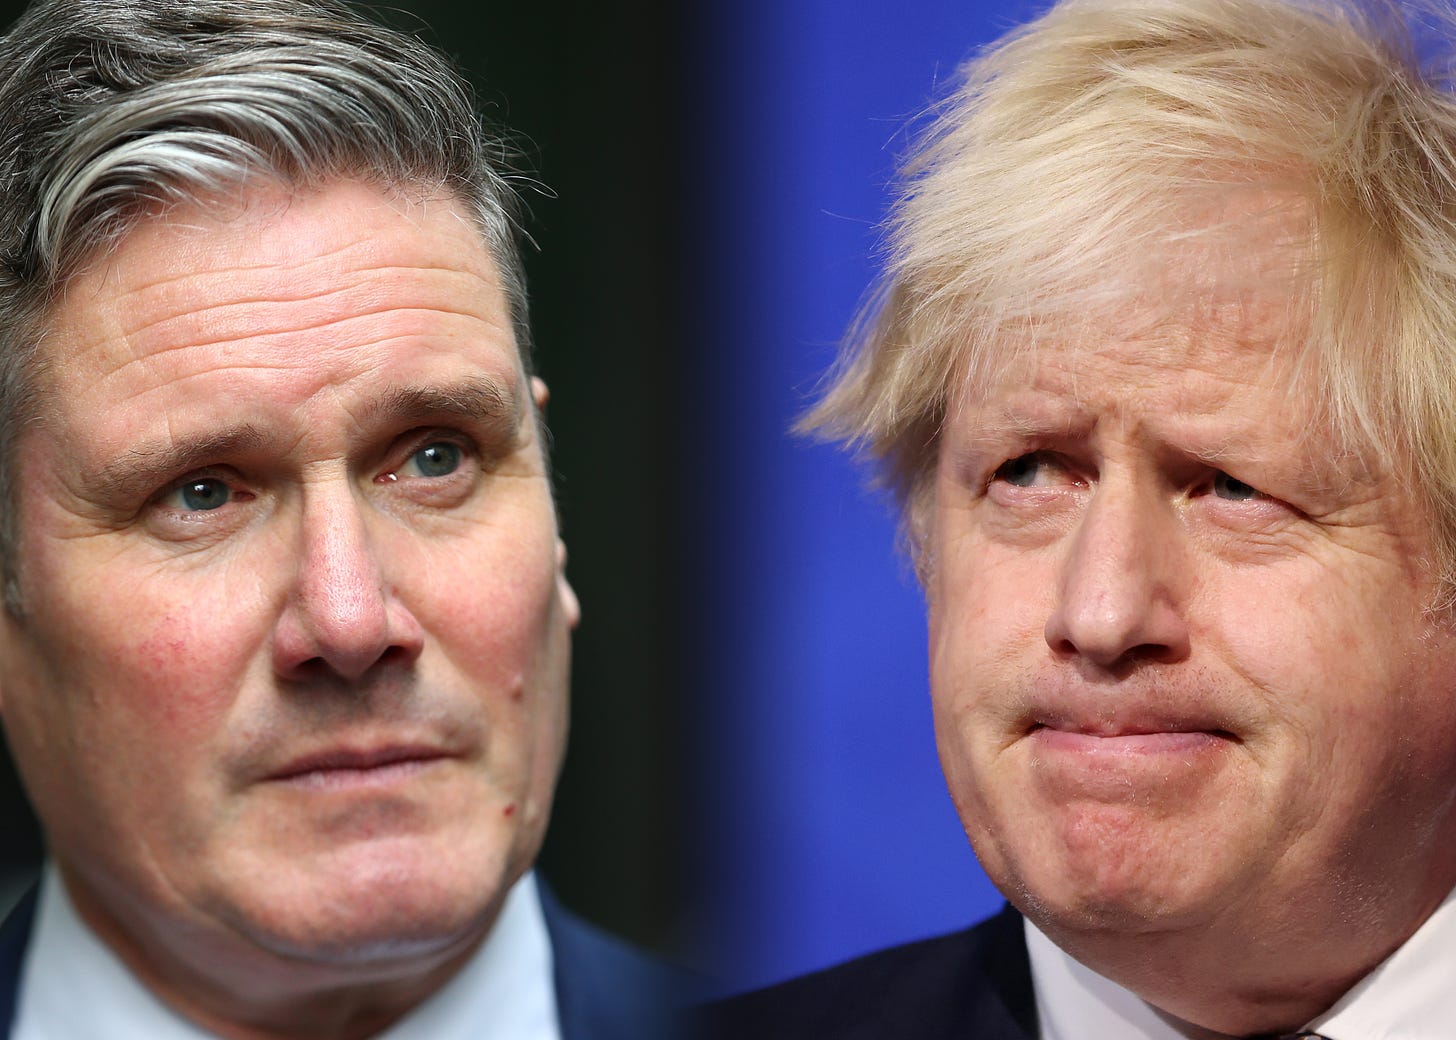  In this composite image a comparison has been made between the leader of the opposition and Labour Leader Keir Starmer (L) and the Prime Minister Boris Johnson.***LEFT IMAGE*** LONDON, ENGLAND - NOVEMBER 01: Opposition Labour party leader Keir Starmer speaks to reporters outside the BBC after his appearance on The Andrew Marr Show on October 31, 2020 in London, England. The show aired the day after British Prime Minister Boris Johnson announced that England would be entering a month-long lockdown to curb a surge in Covid-19 cases. (Photo by Hollie Adams/Getty Images) ***RIGHT IMAGE*** LONDON, ENGLAND - NOVEMBER 27: Prime Minister Boris Johnson speaks during a press conference after cases of the new Covid-19 variant were confirmed in the United Kingdom on November 27, 2021 in London, England. UK authorities confirmed today that two cases of the new Omicron Covid-19 variant, which had prompted a flurry of travel bans affecting several countries in Southern Africa, were found in the UK. (Photo by Hollie Adams - WPA Pool/Getty Images)